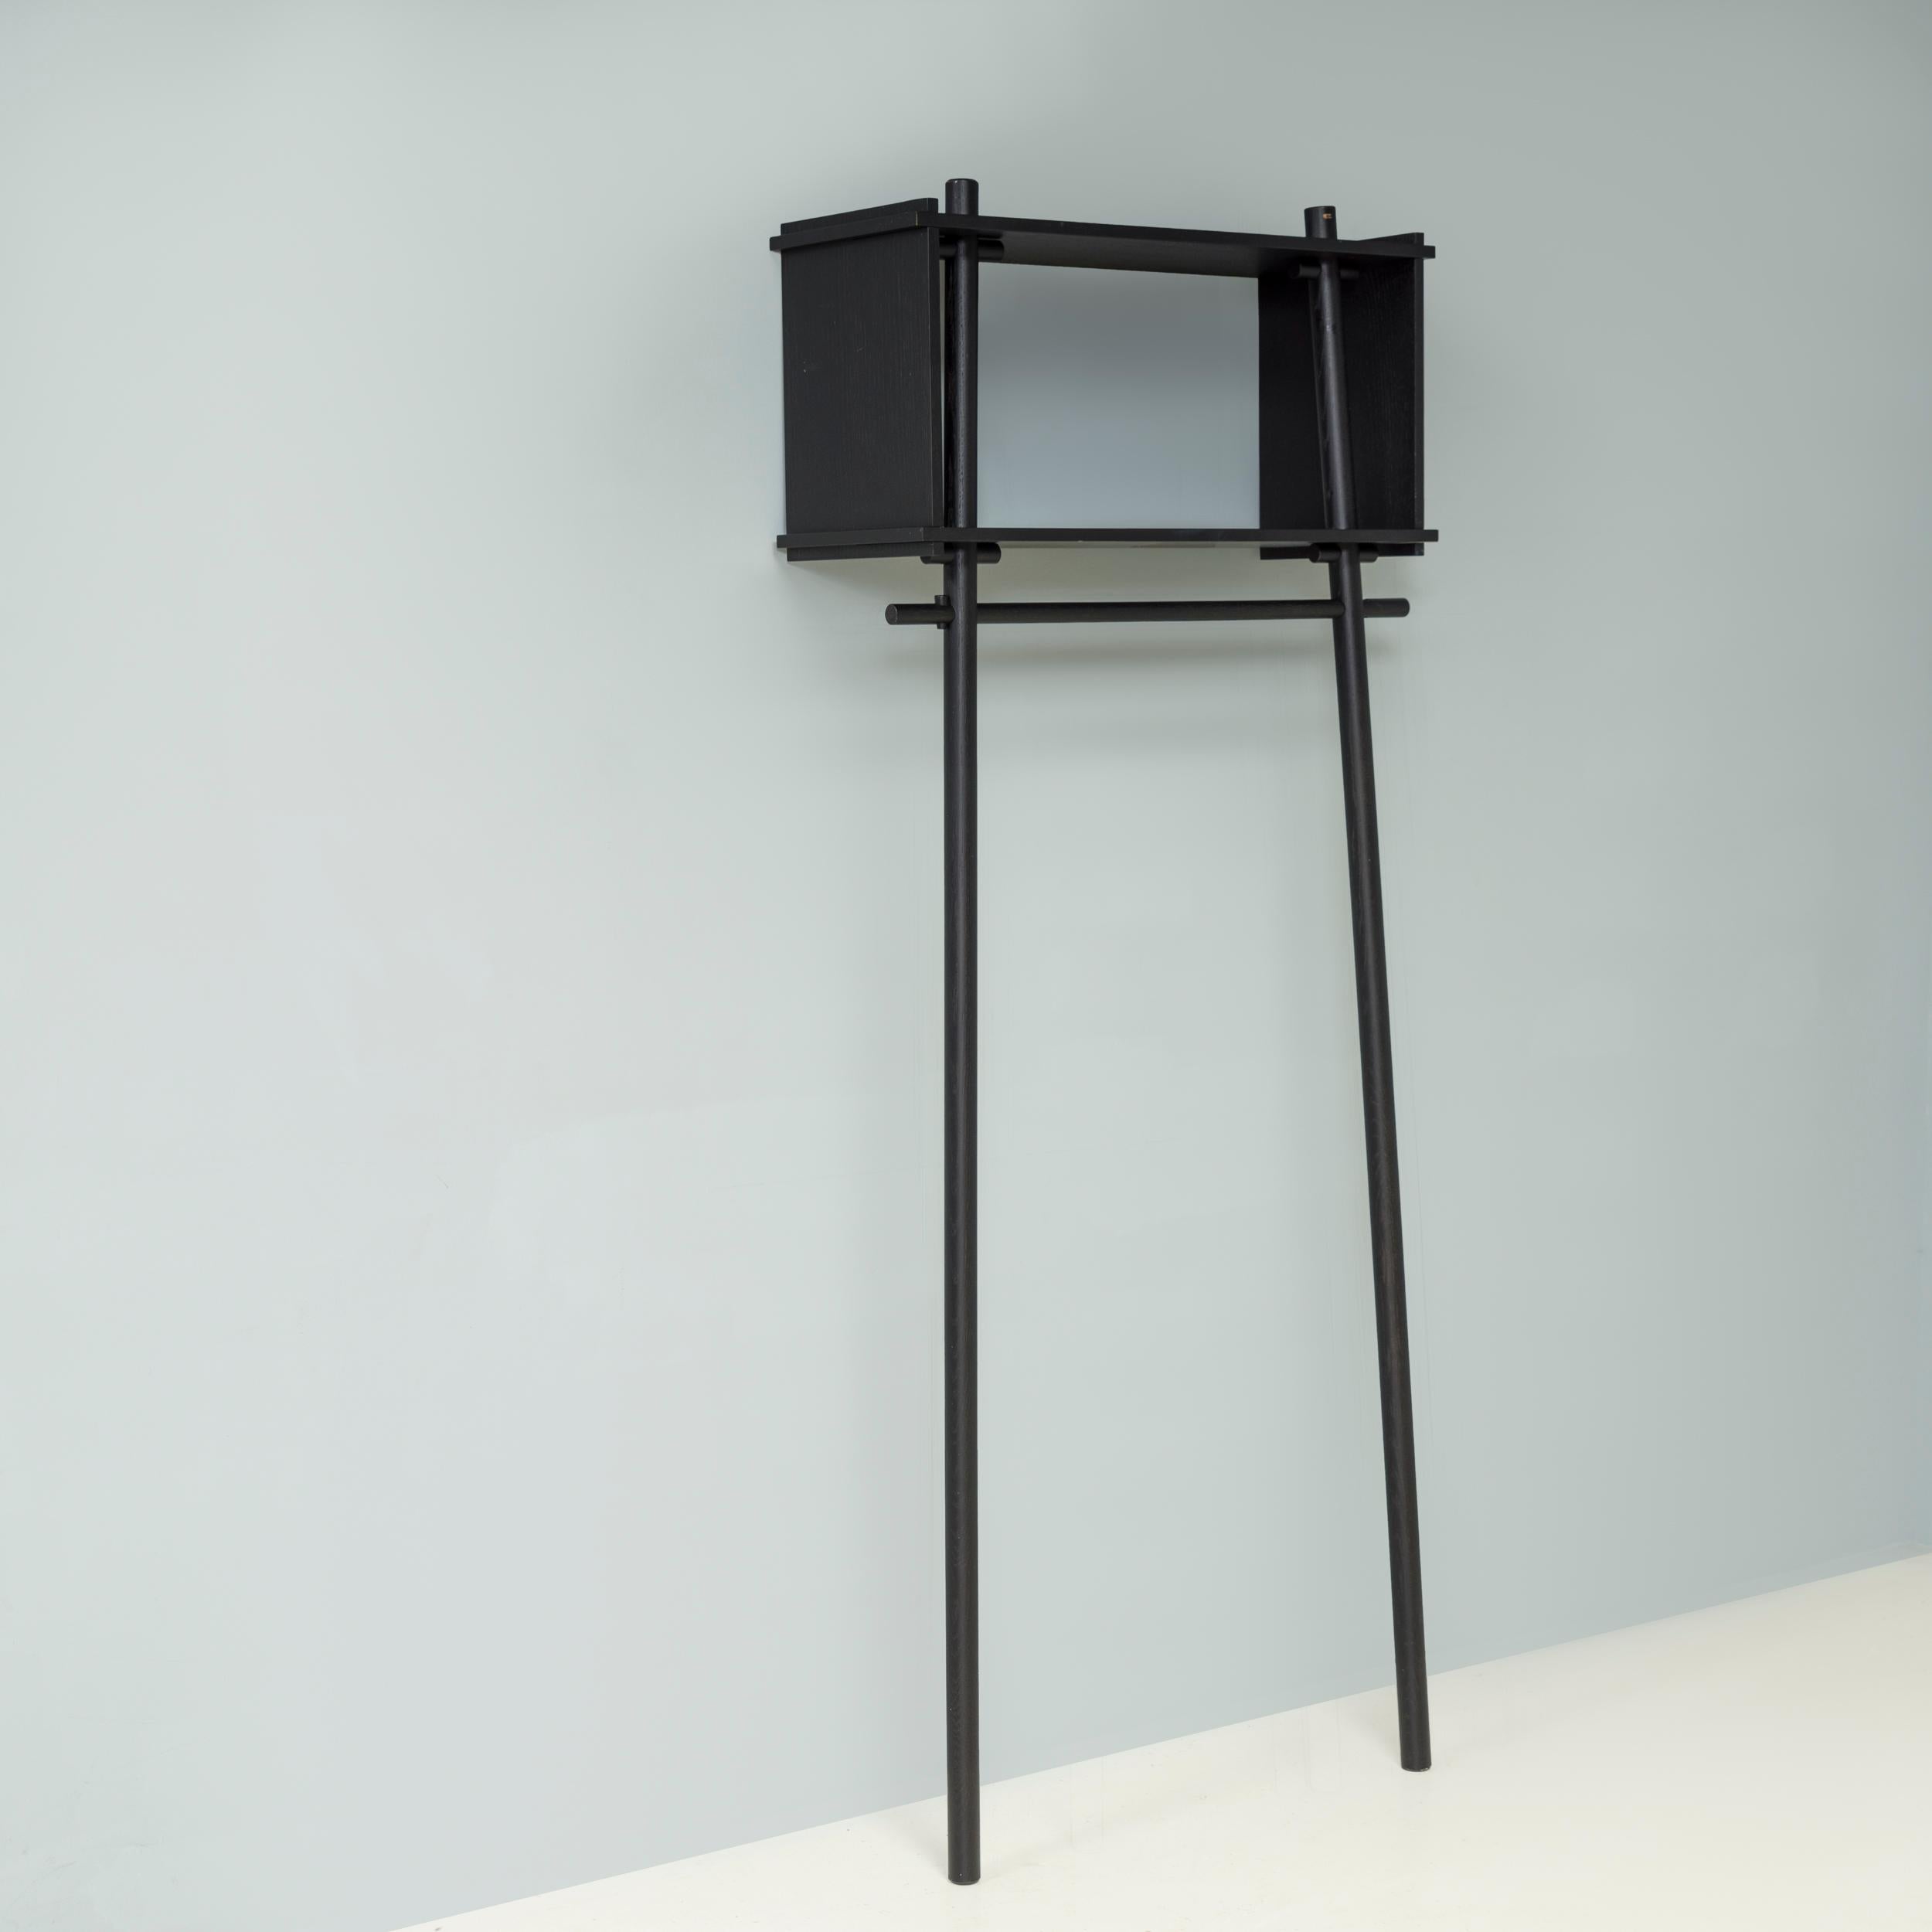 Designed by Michael Daae Christensen of Made by Michael and manufactured by Woud, the Töjbox coat rack is a fantastic example of contemporary Scandinavian design.

Constructed from black oak using traditional joinery techniques, the coat rack has no